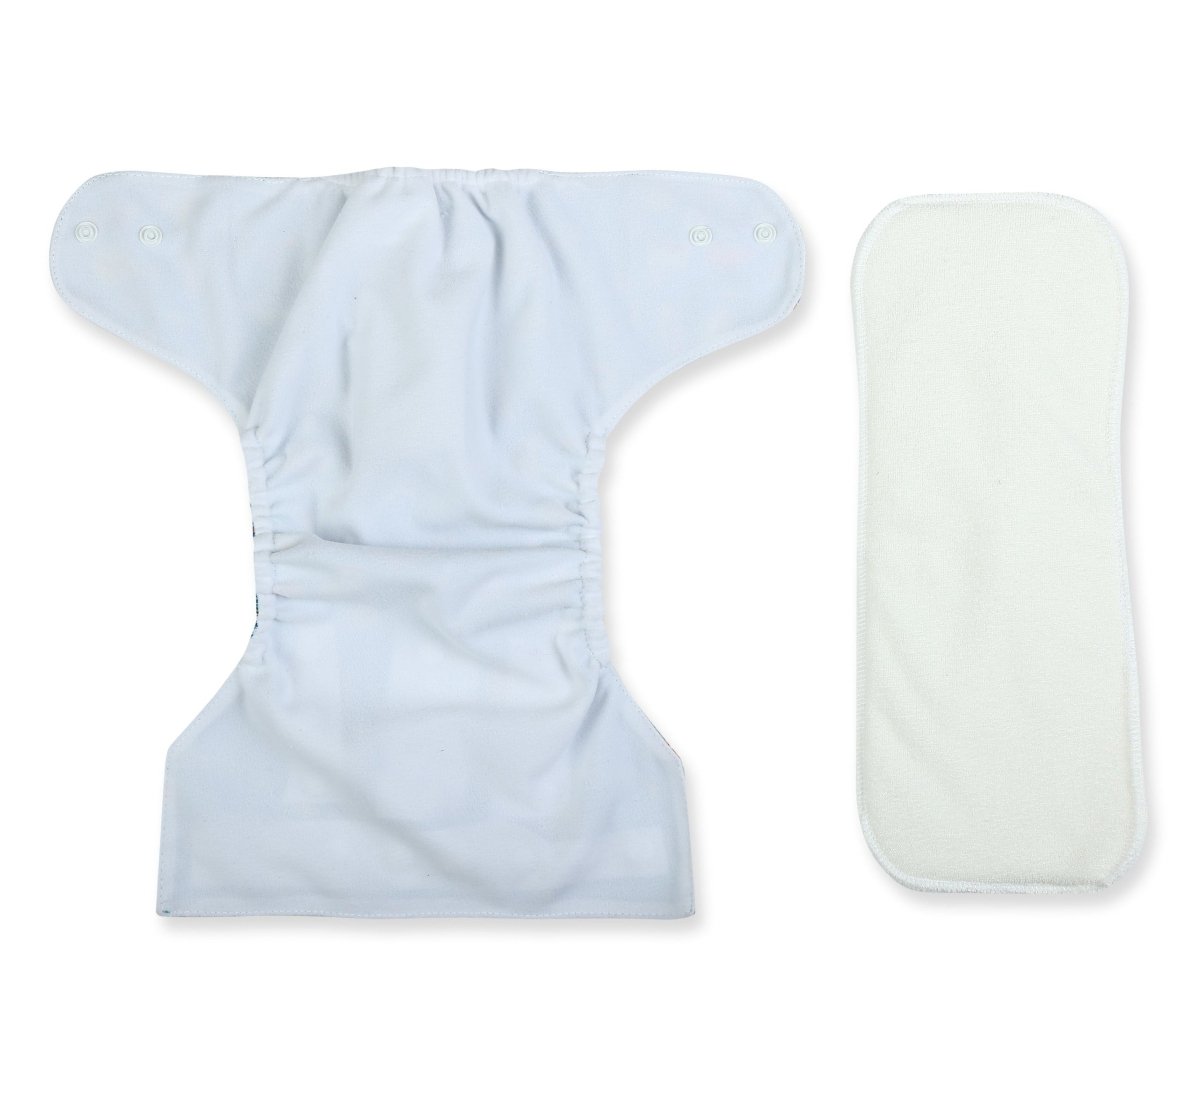 Combo of 3 Reusable Diapers- Option 10 - DPR-3-LCTR-3-3